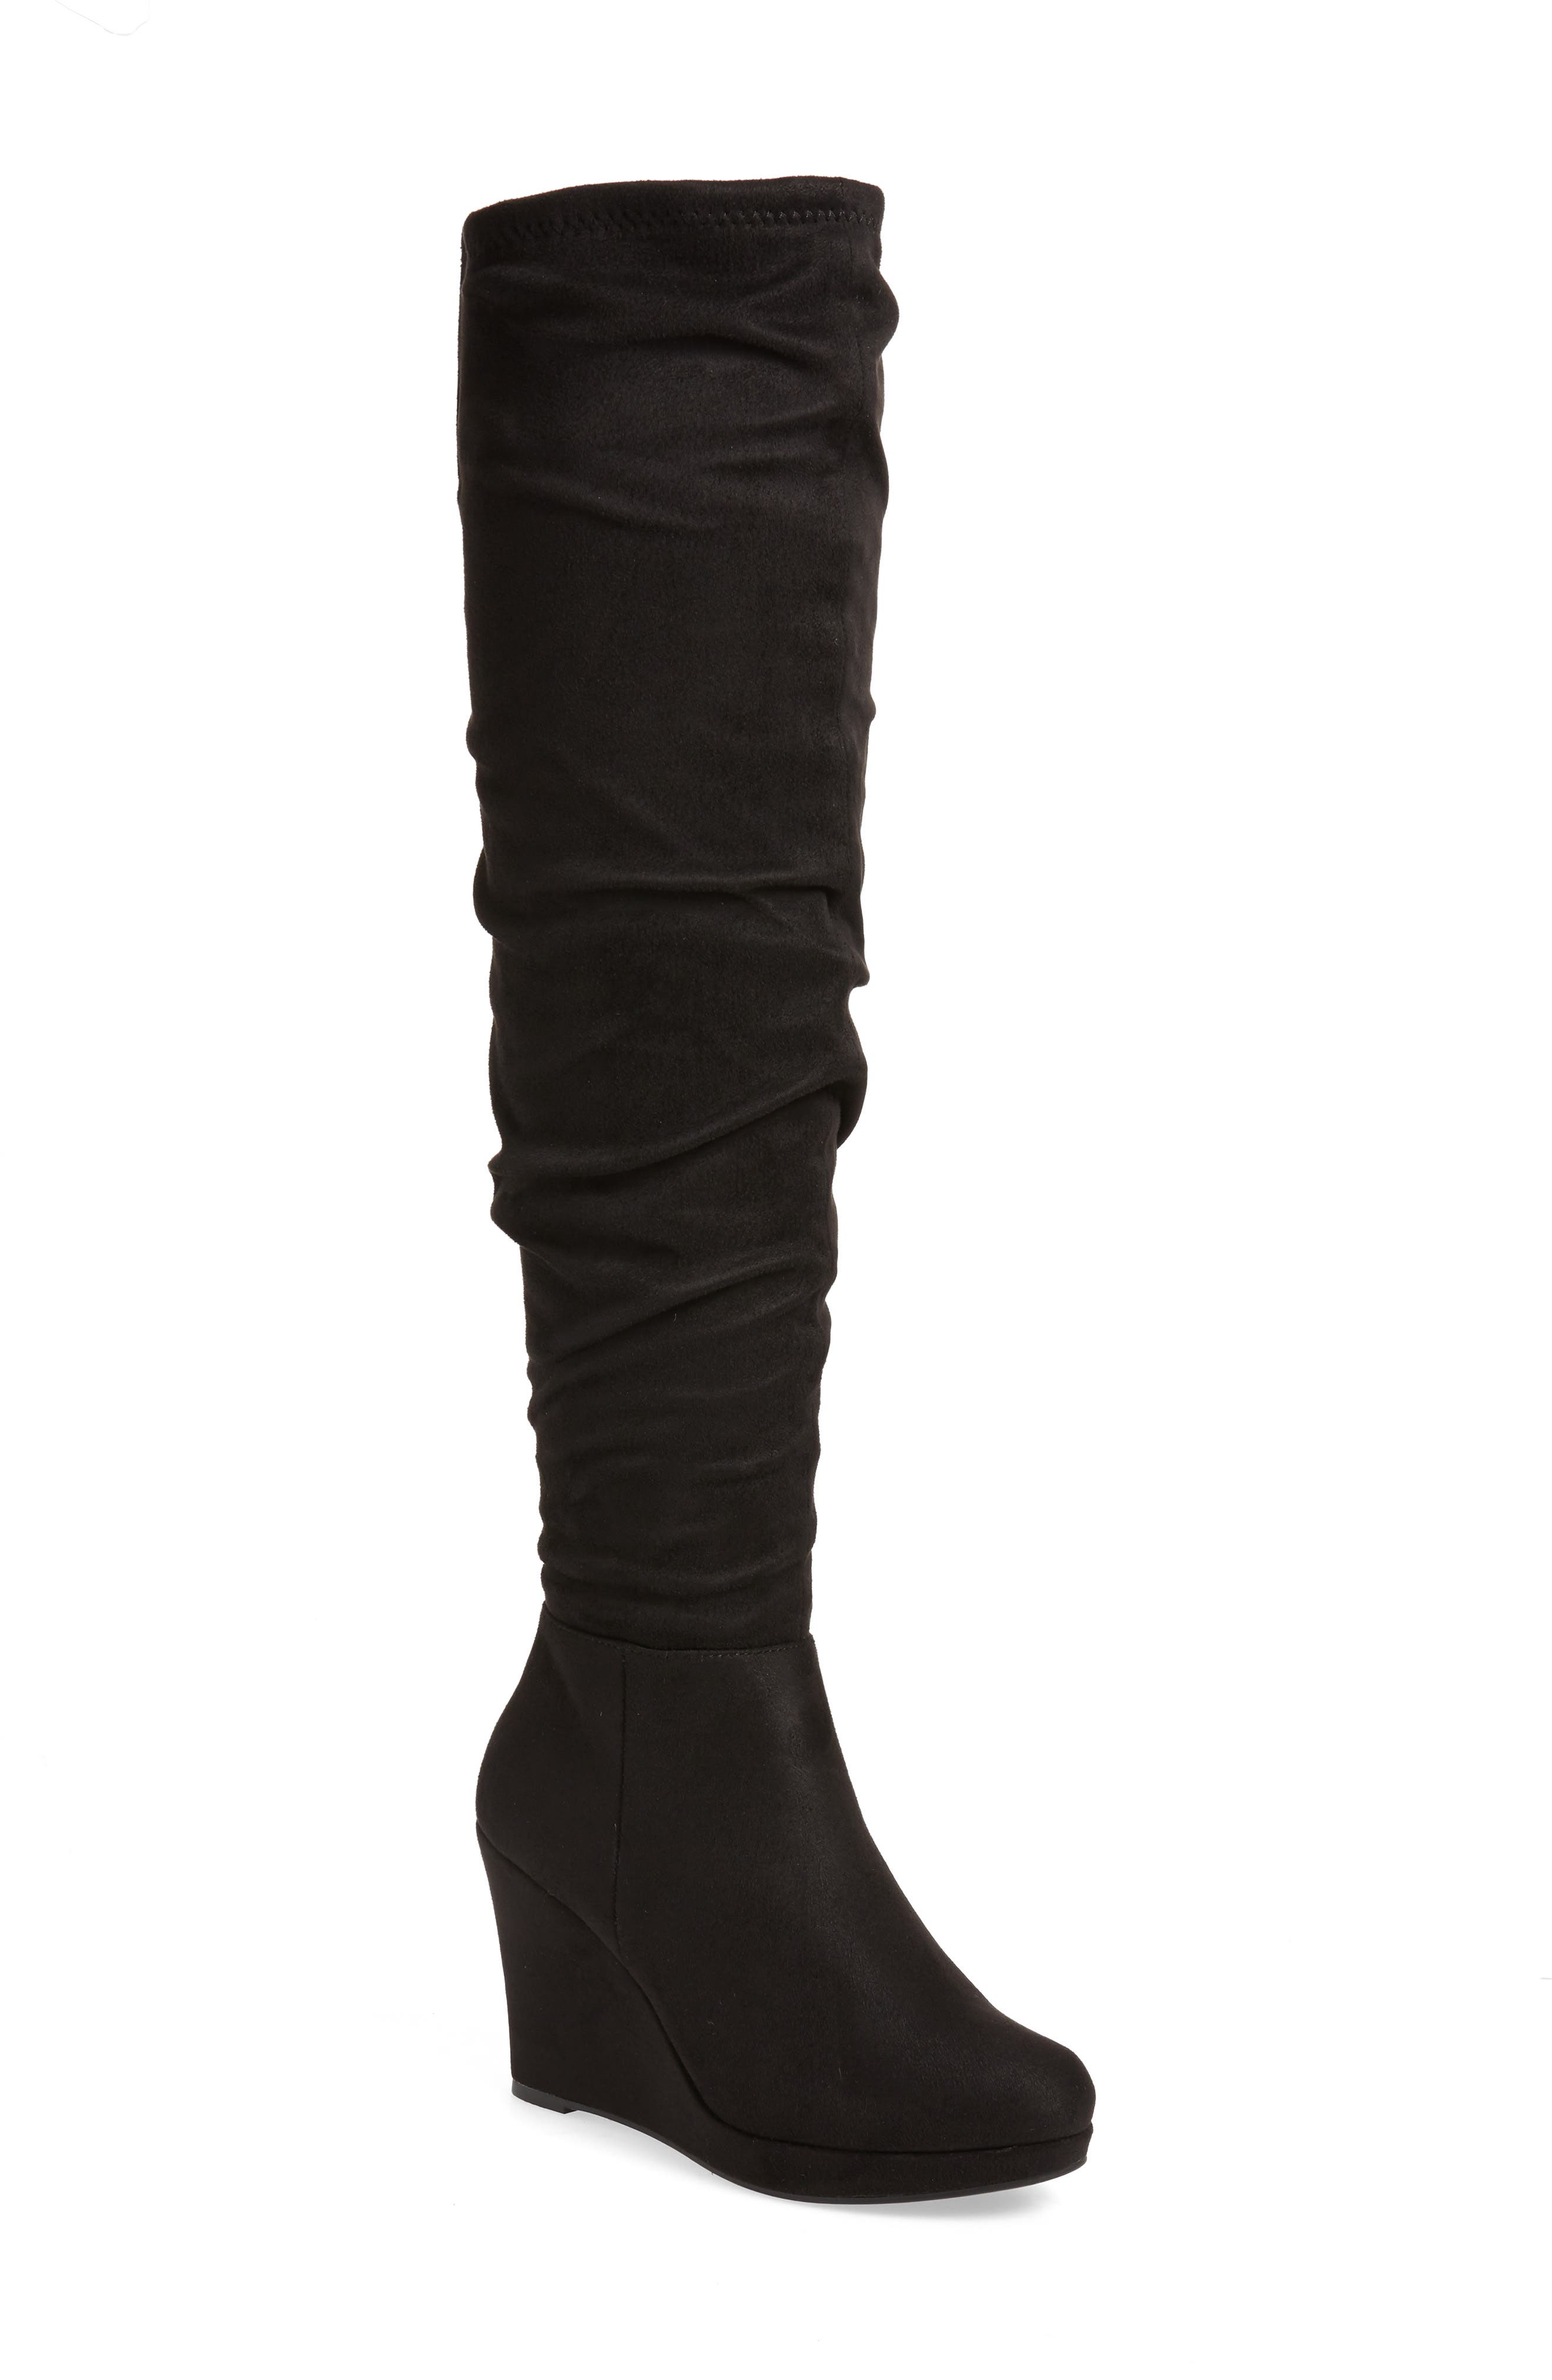 wedge over the knee high boots